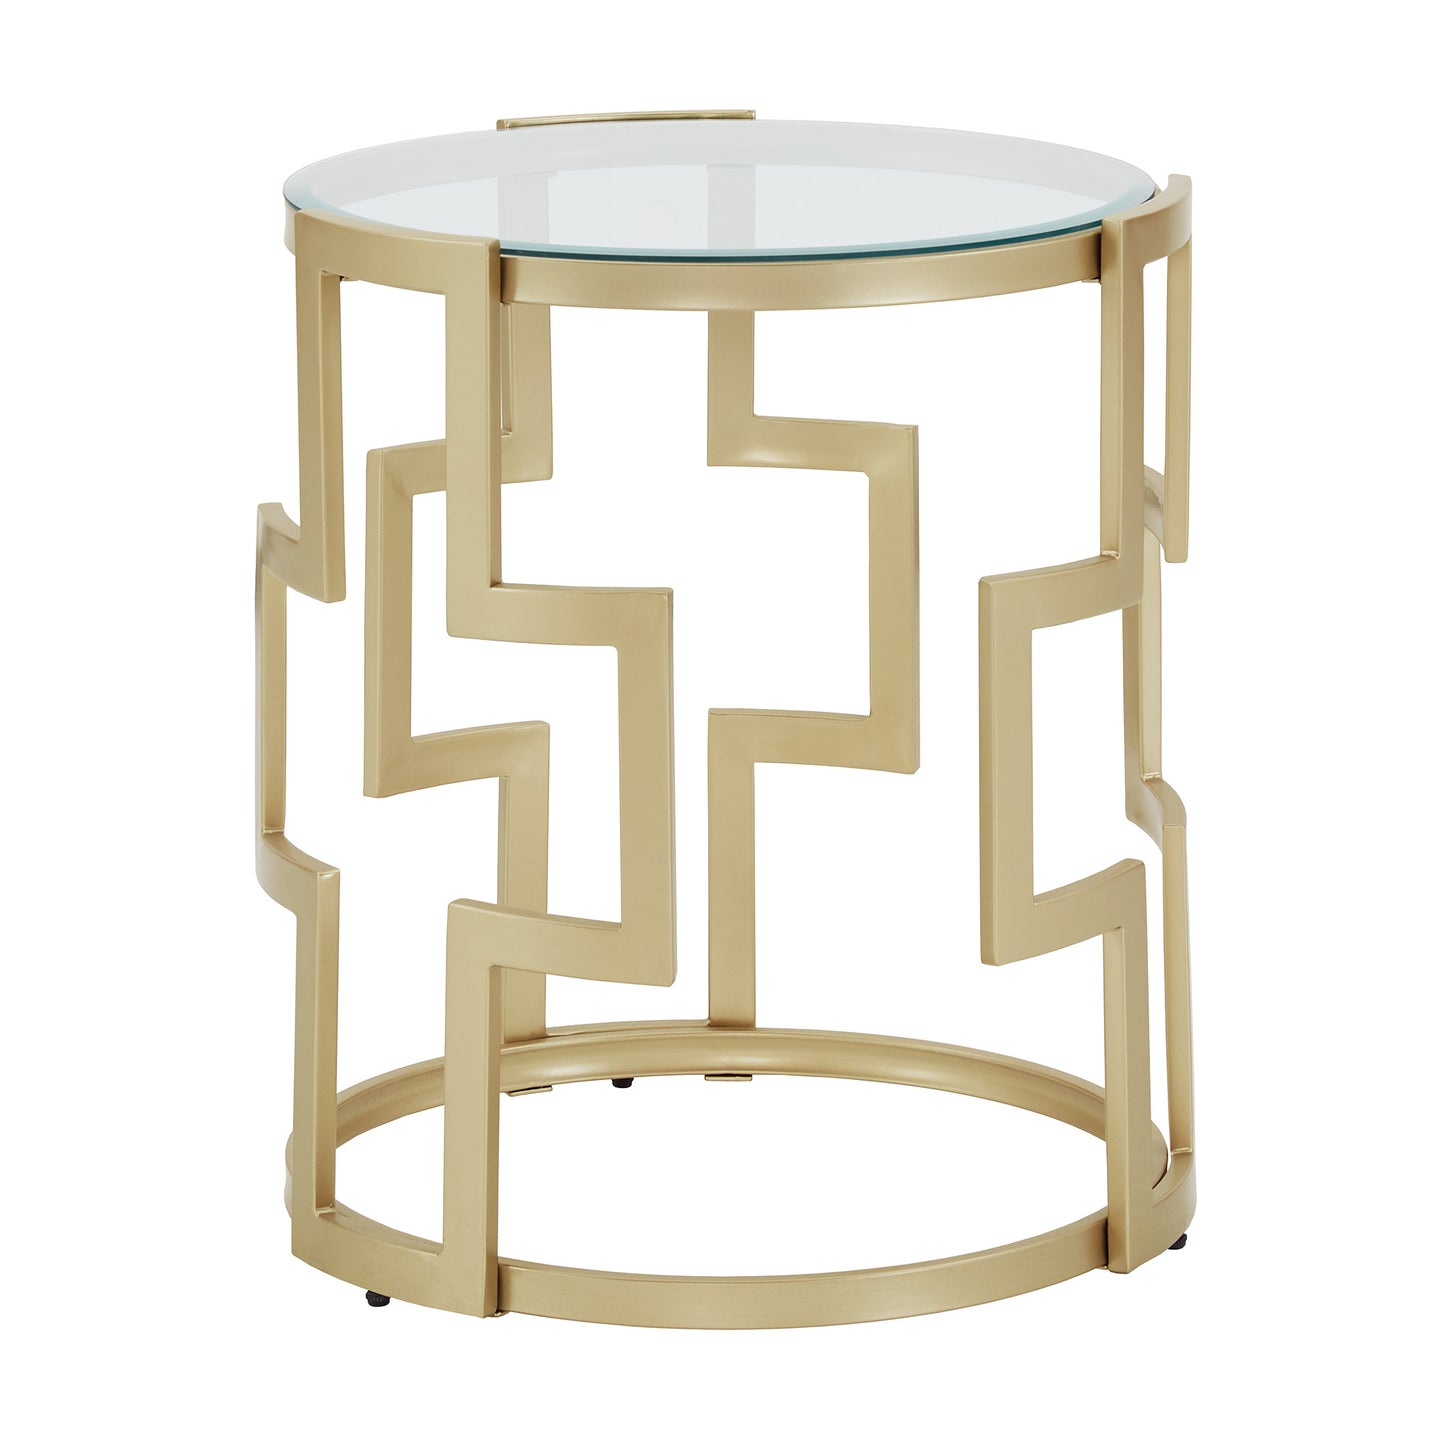 23" Tall Glass End Table - Matte Gold Finish, Clear Glass Top